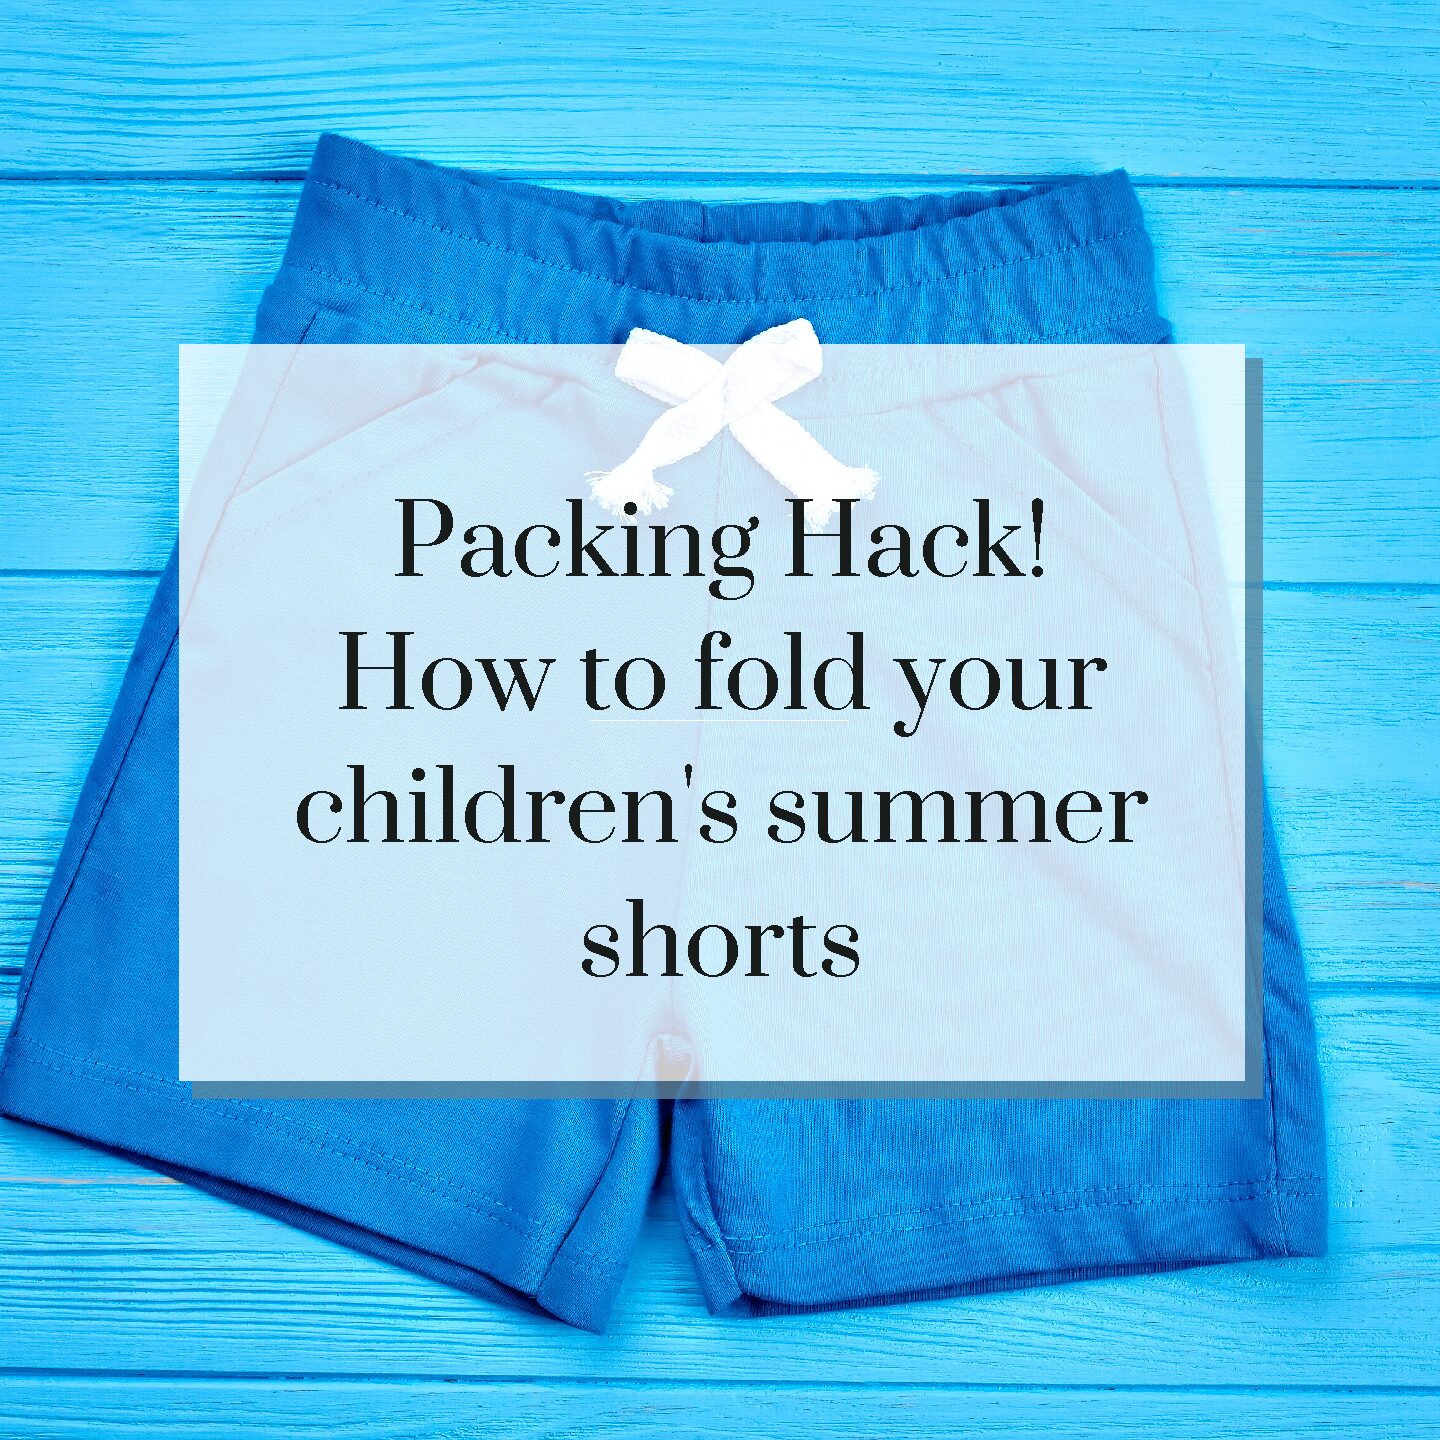 Packing Hack! How to fold your children’s shorts!